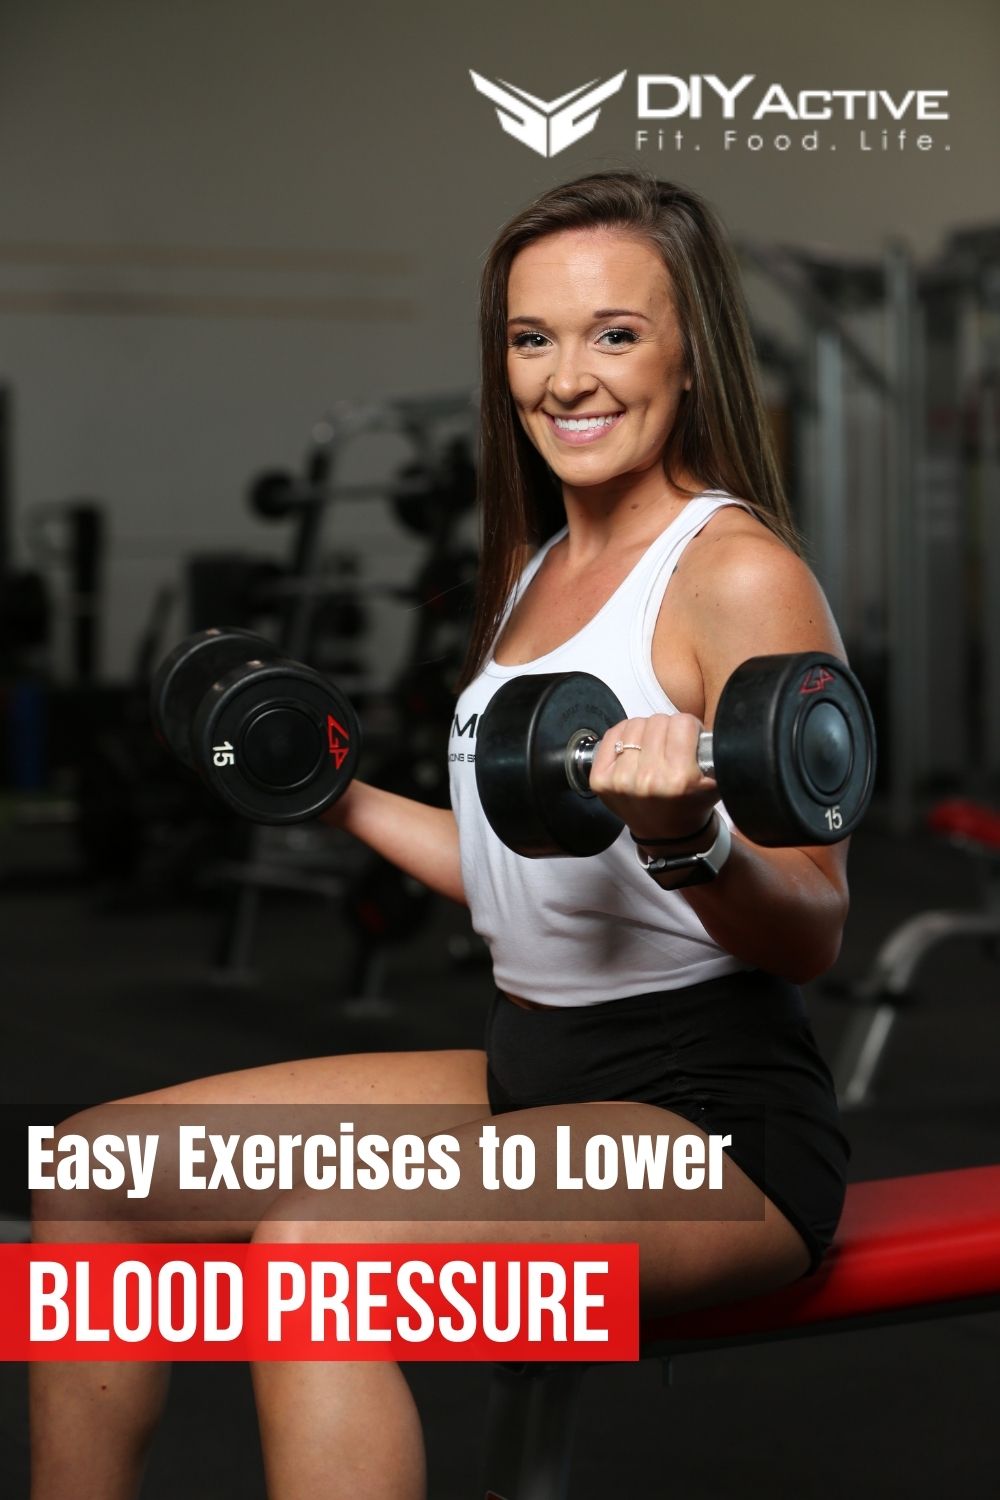 Three Easy Exercises to Lower Blood Pressure Immediately